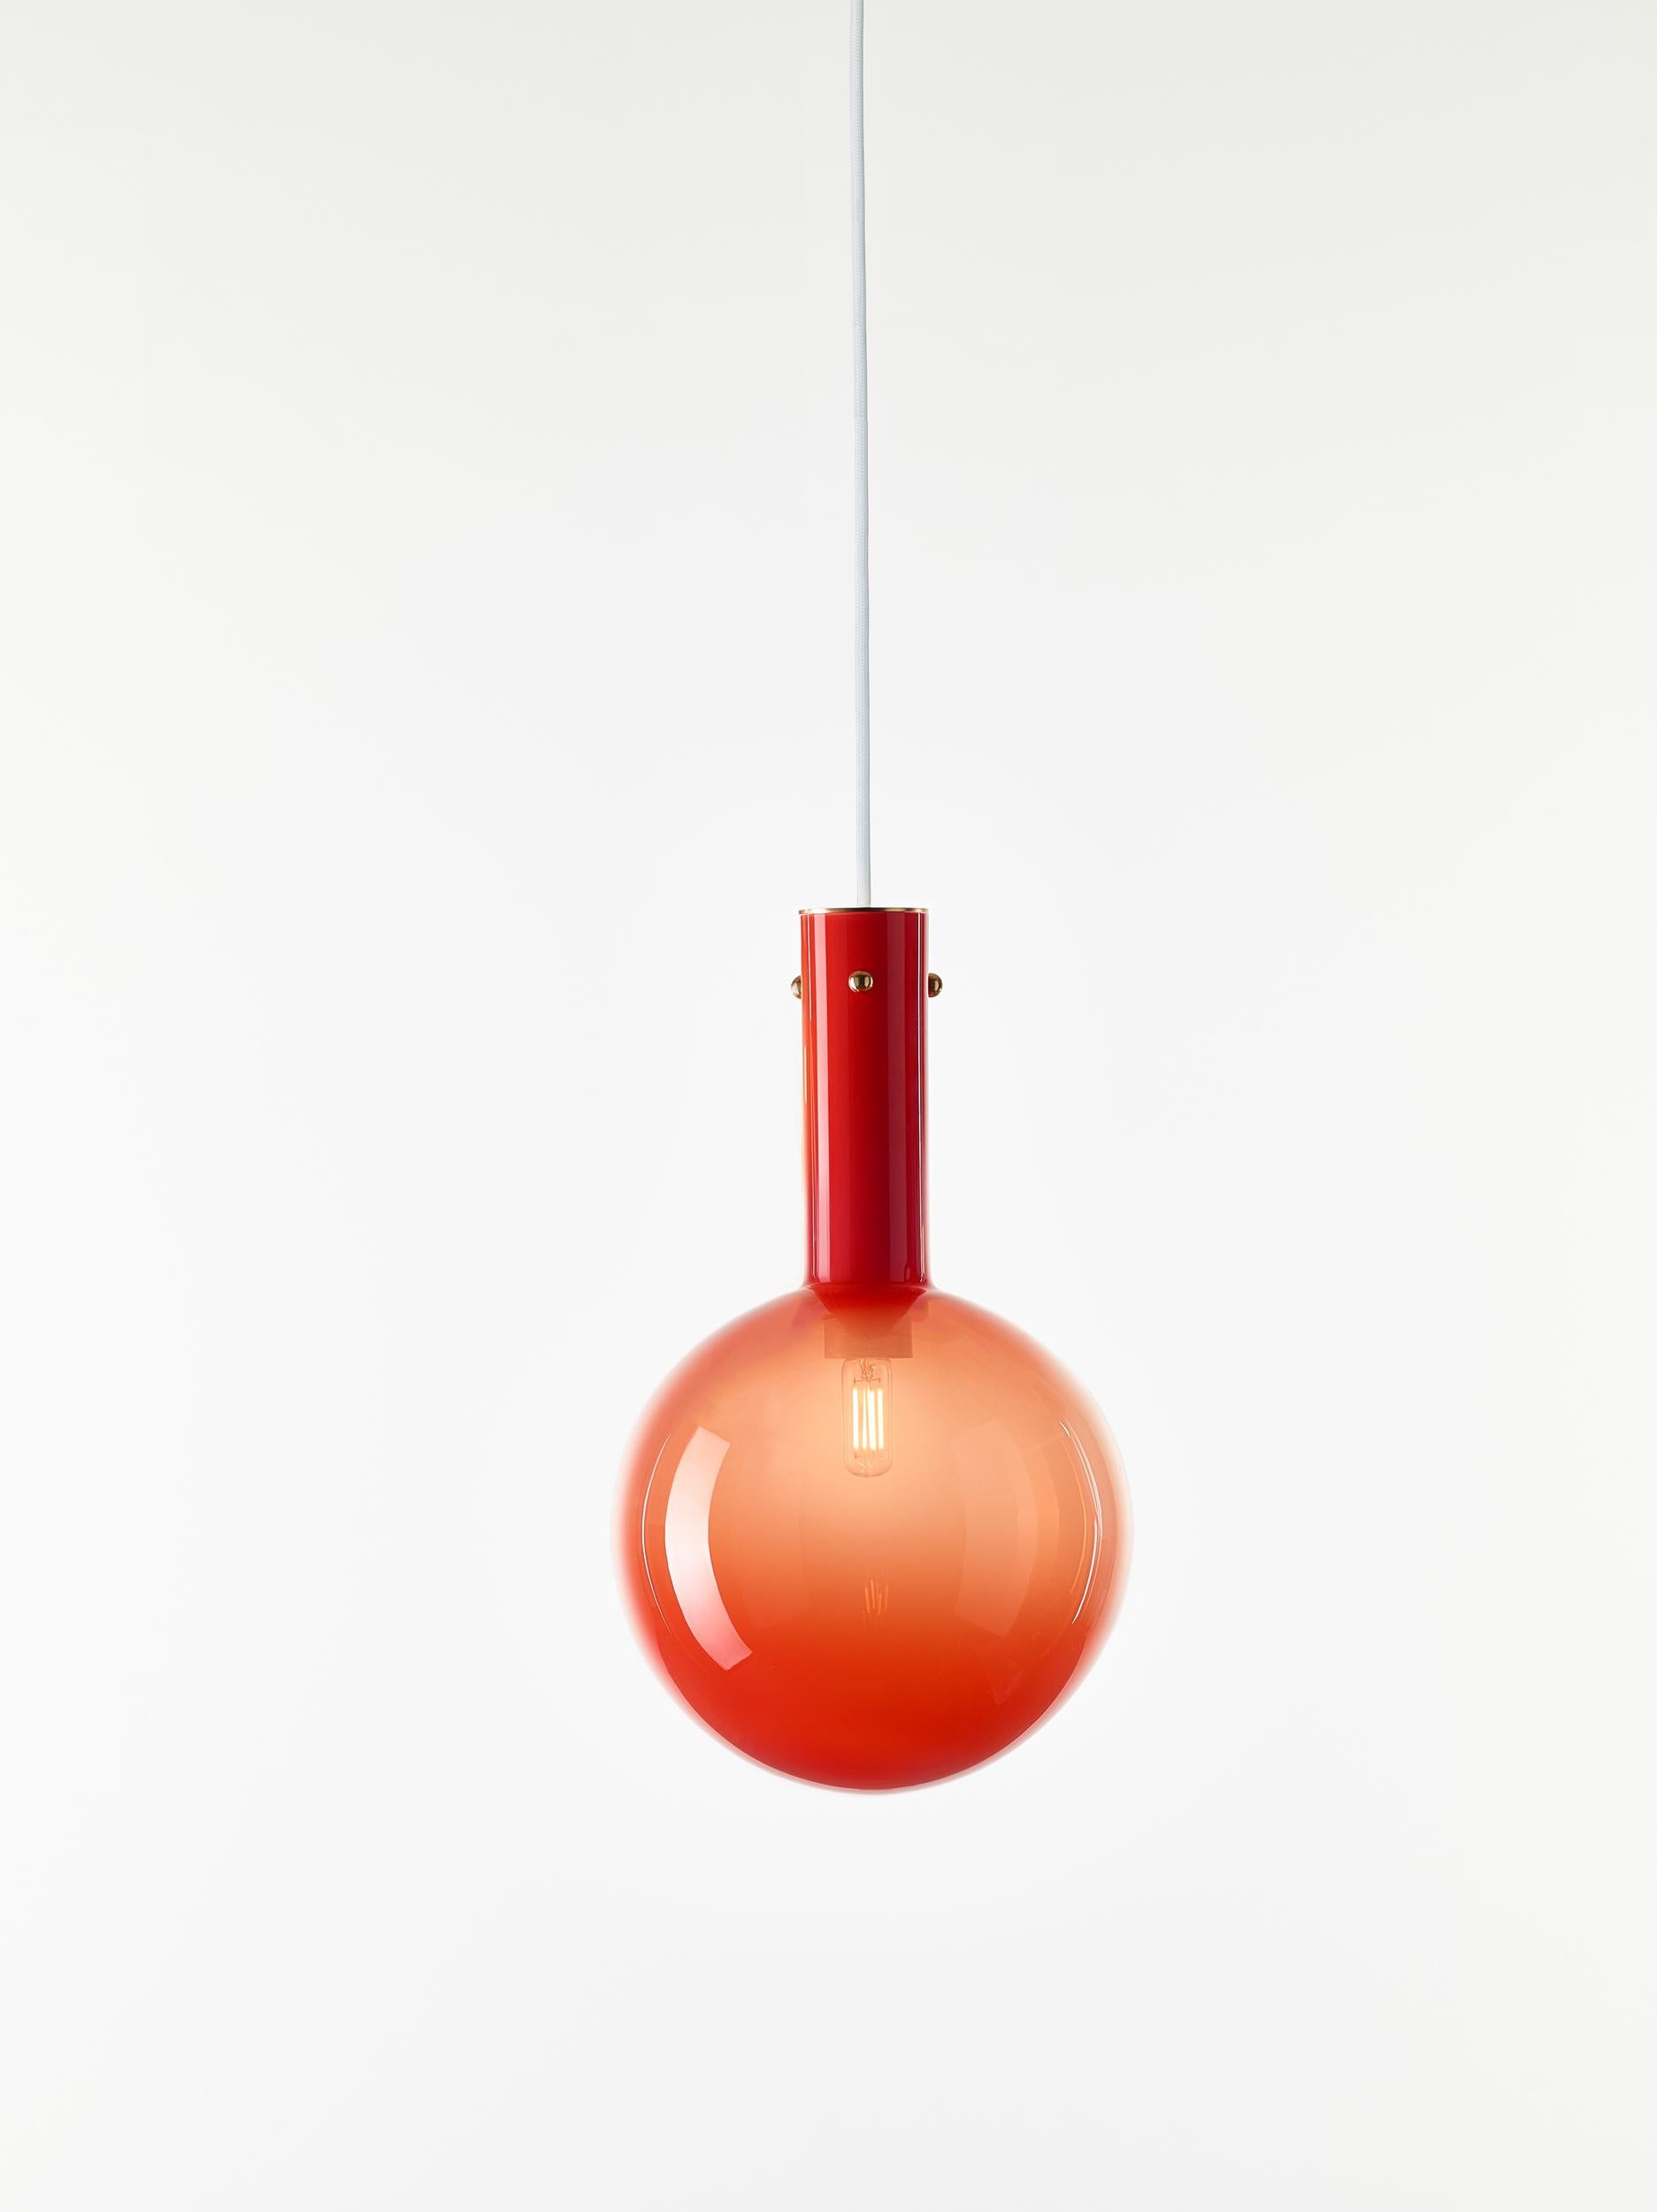 Set of 2 red Sphaerae pendant lights by Dechem Studio
Dimensions: D 20 x H 180 cm
Materials: brass, metal, glass.
Also available: different finishes and colors available.

Only one homogenous piece of hand-blown glass creates the main body of